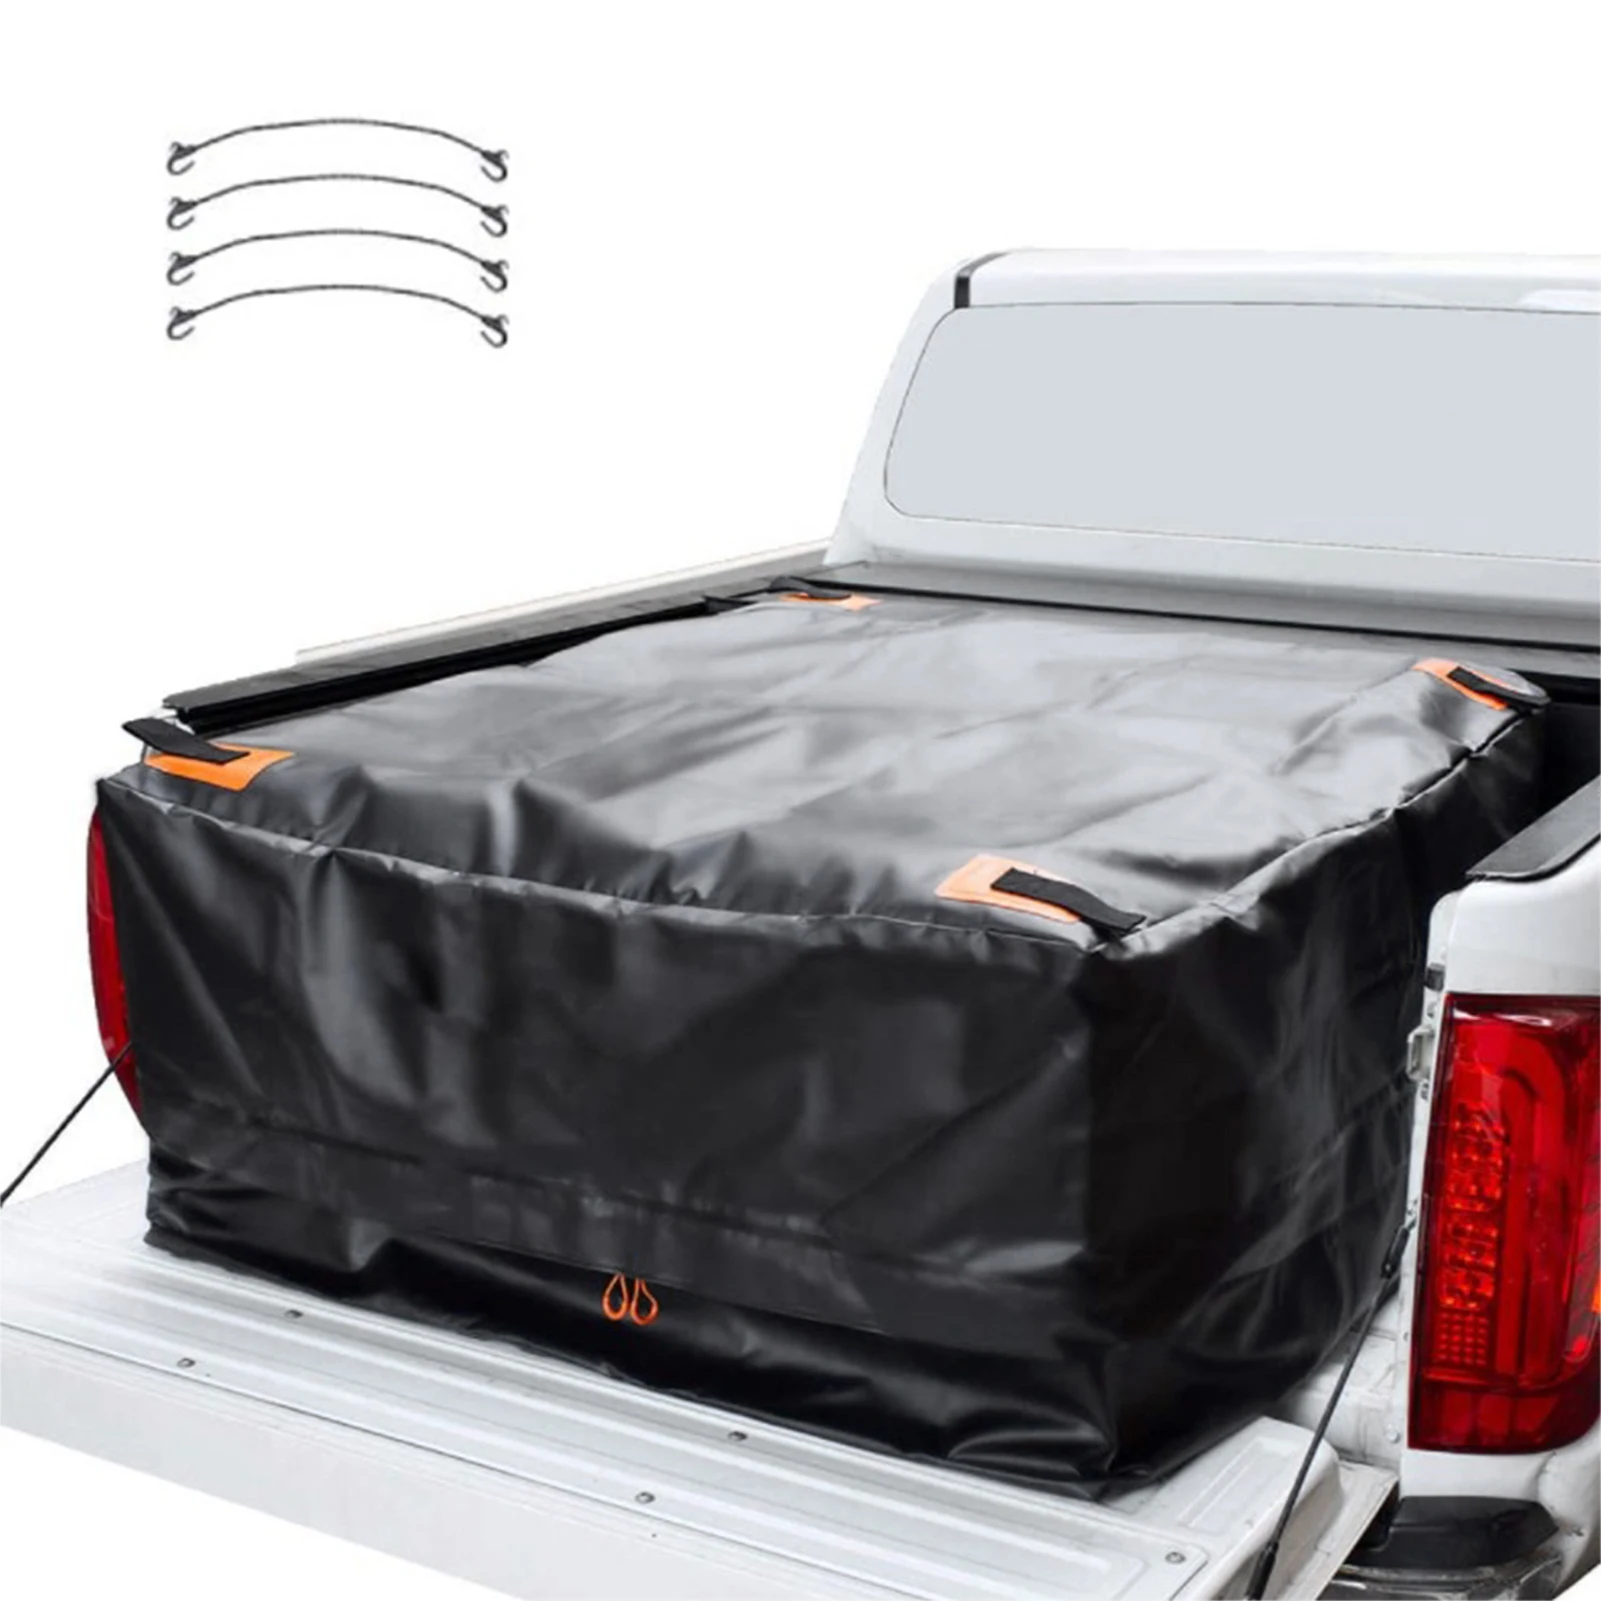 

130x102x56cm Waterproof Car Cargo Rooftop Bag Large Capacity Rack Storage Luggage Carrier Travel Bag For SUV Pickup Truck